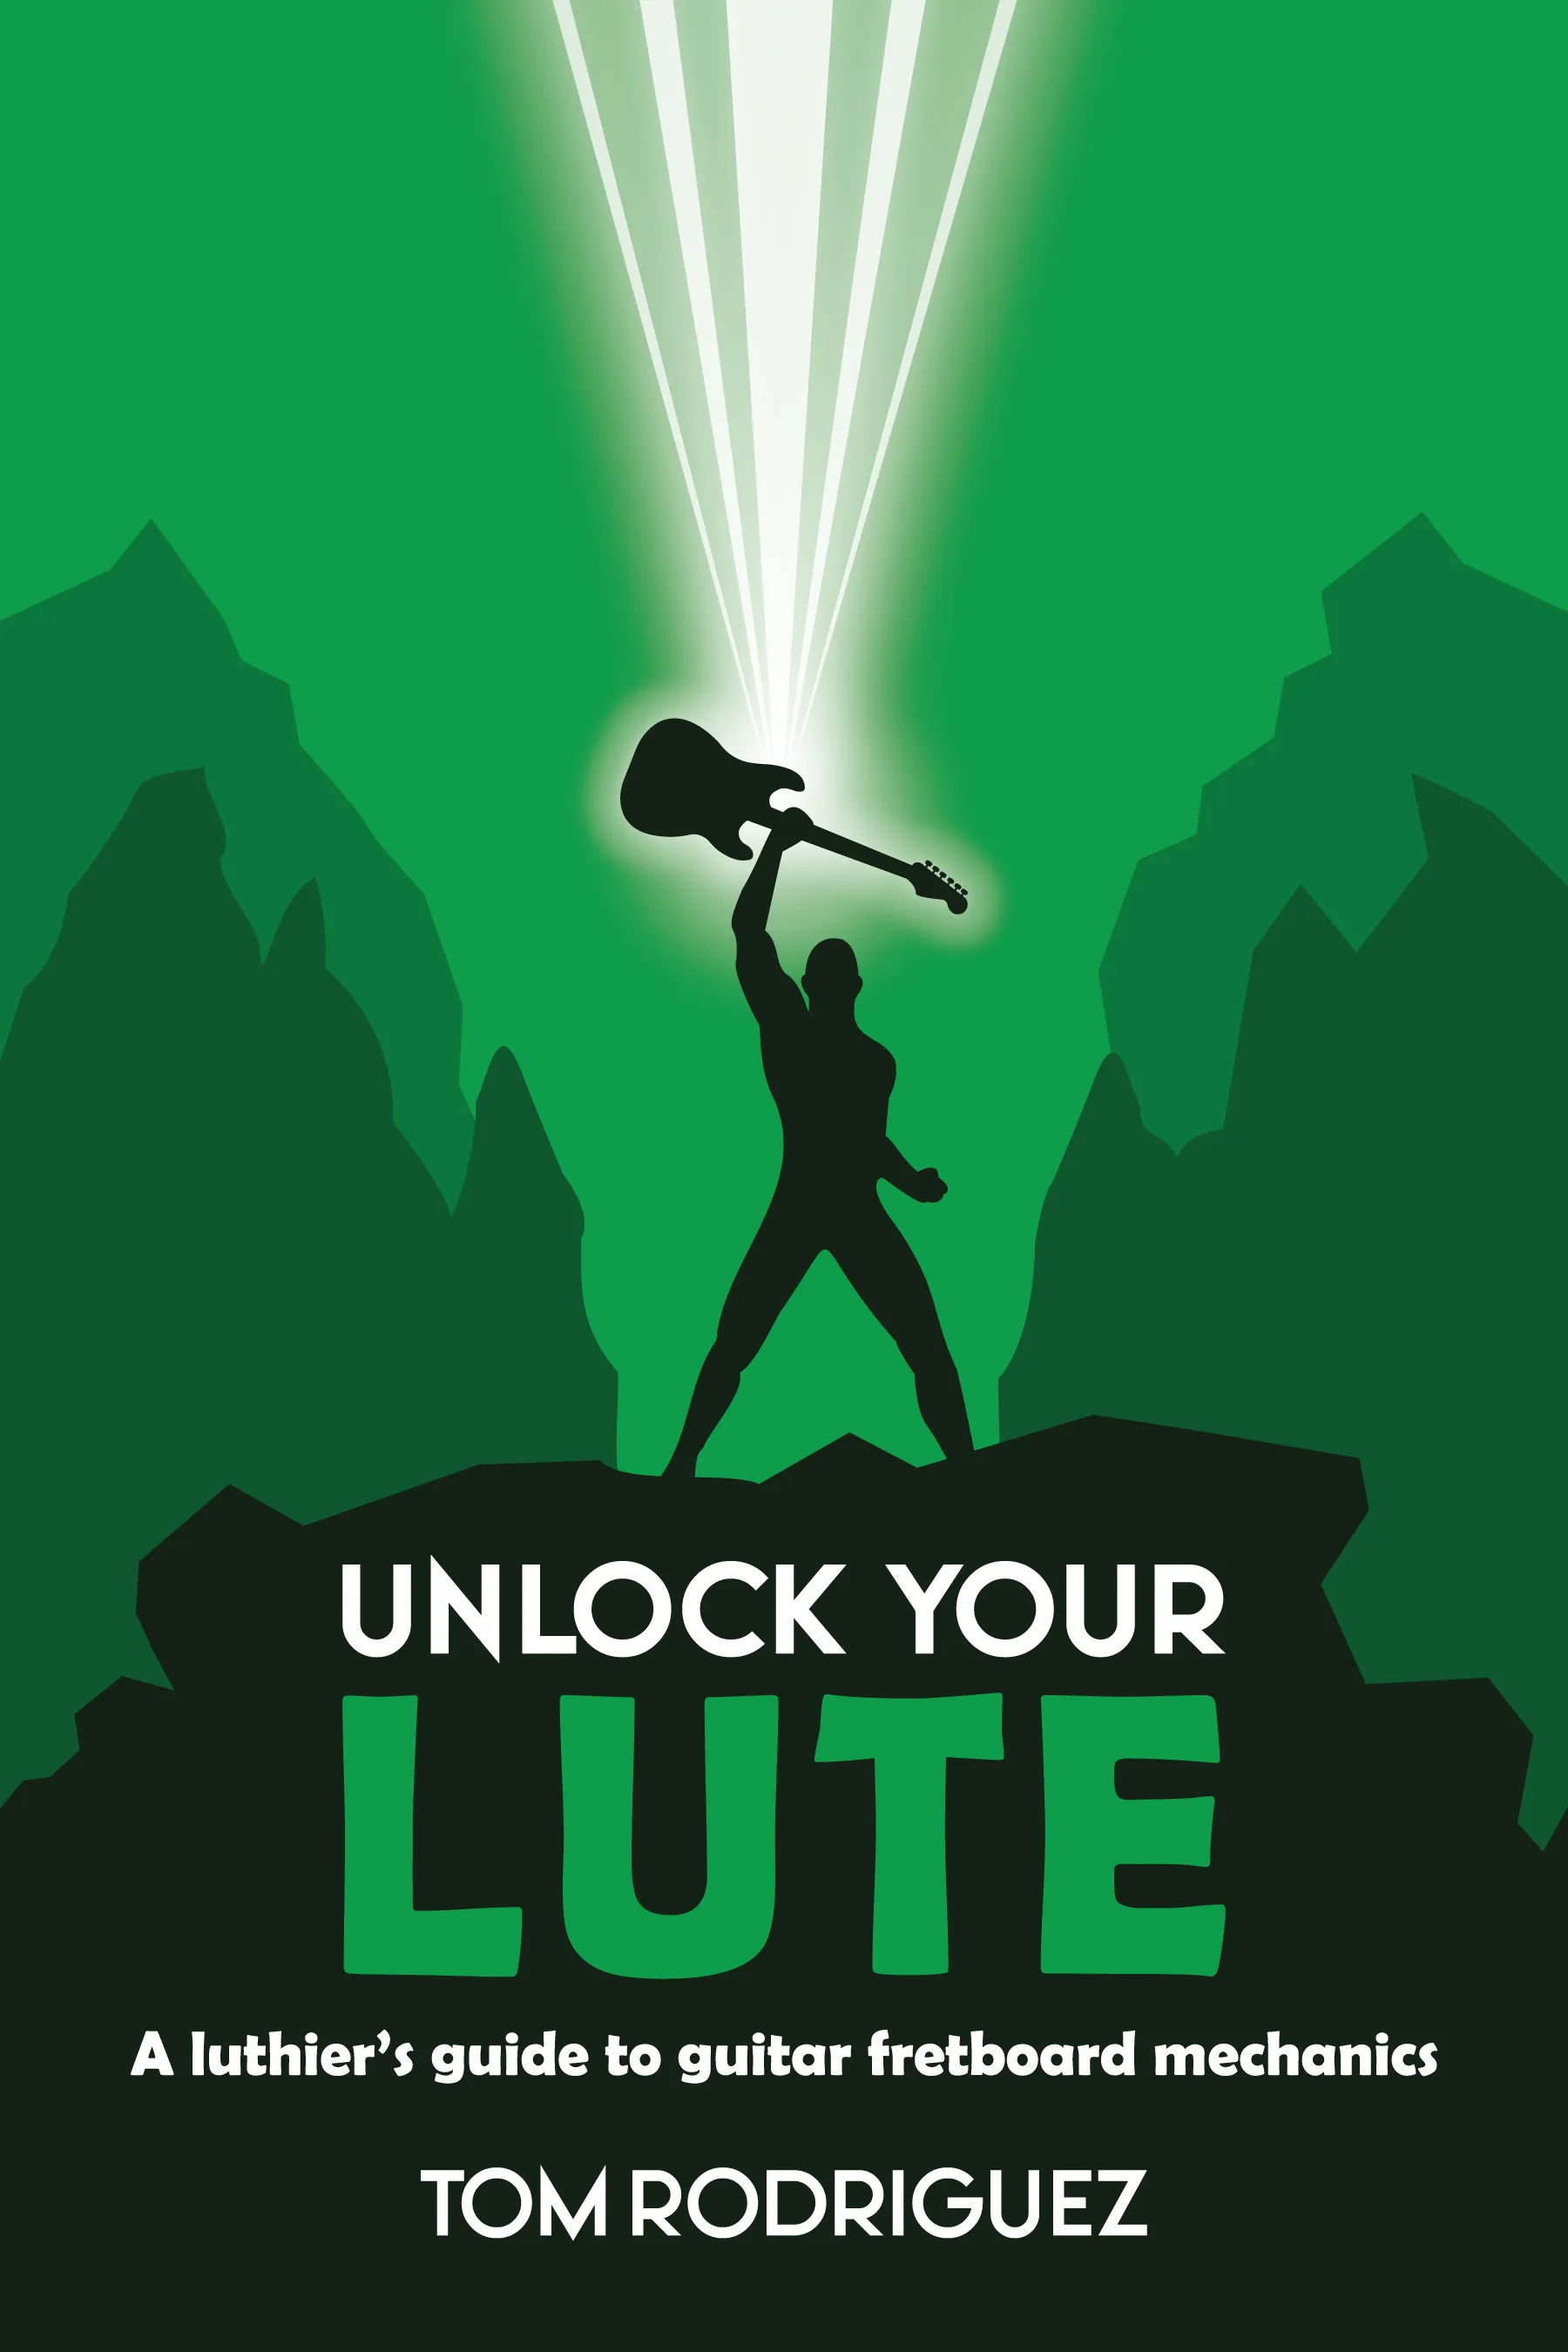 Unlock your lute book cover